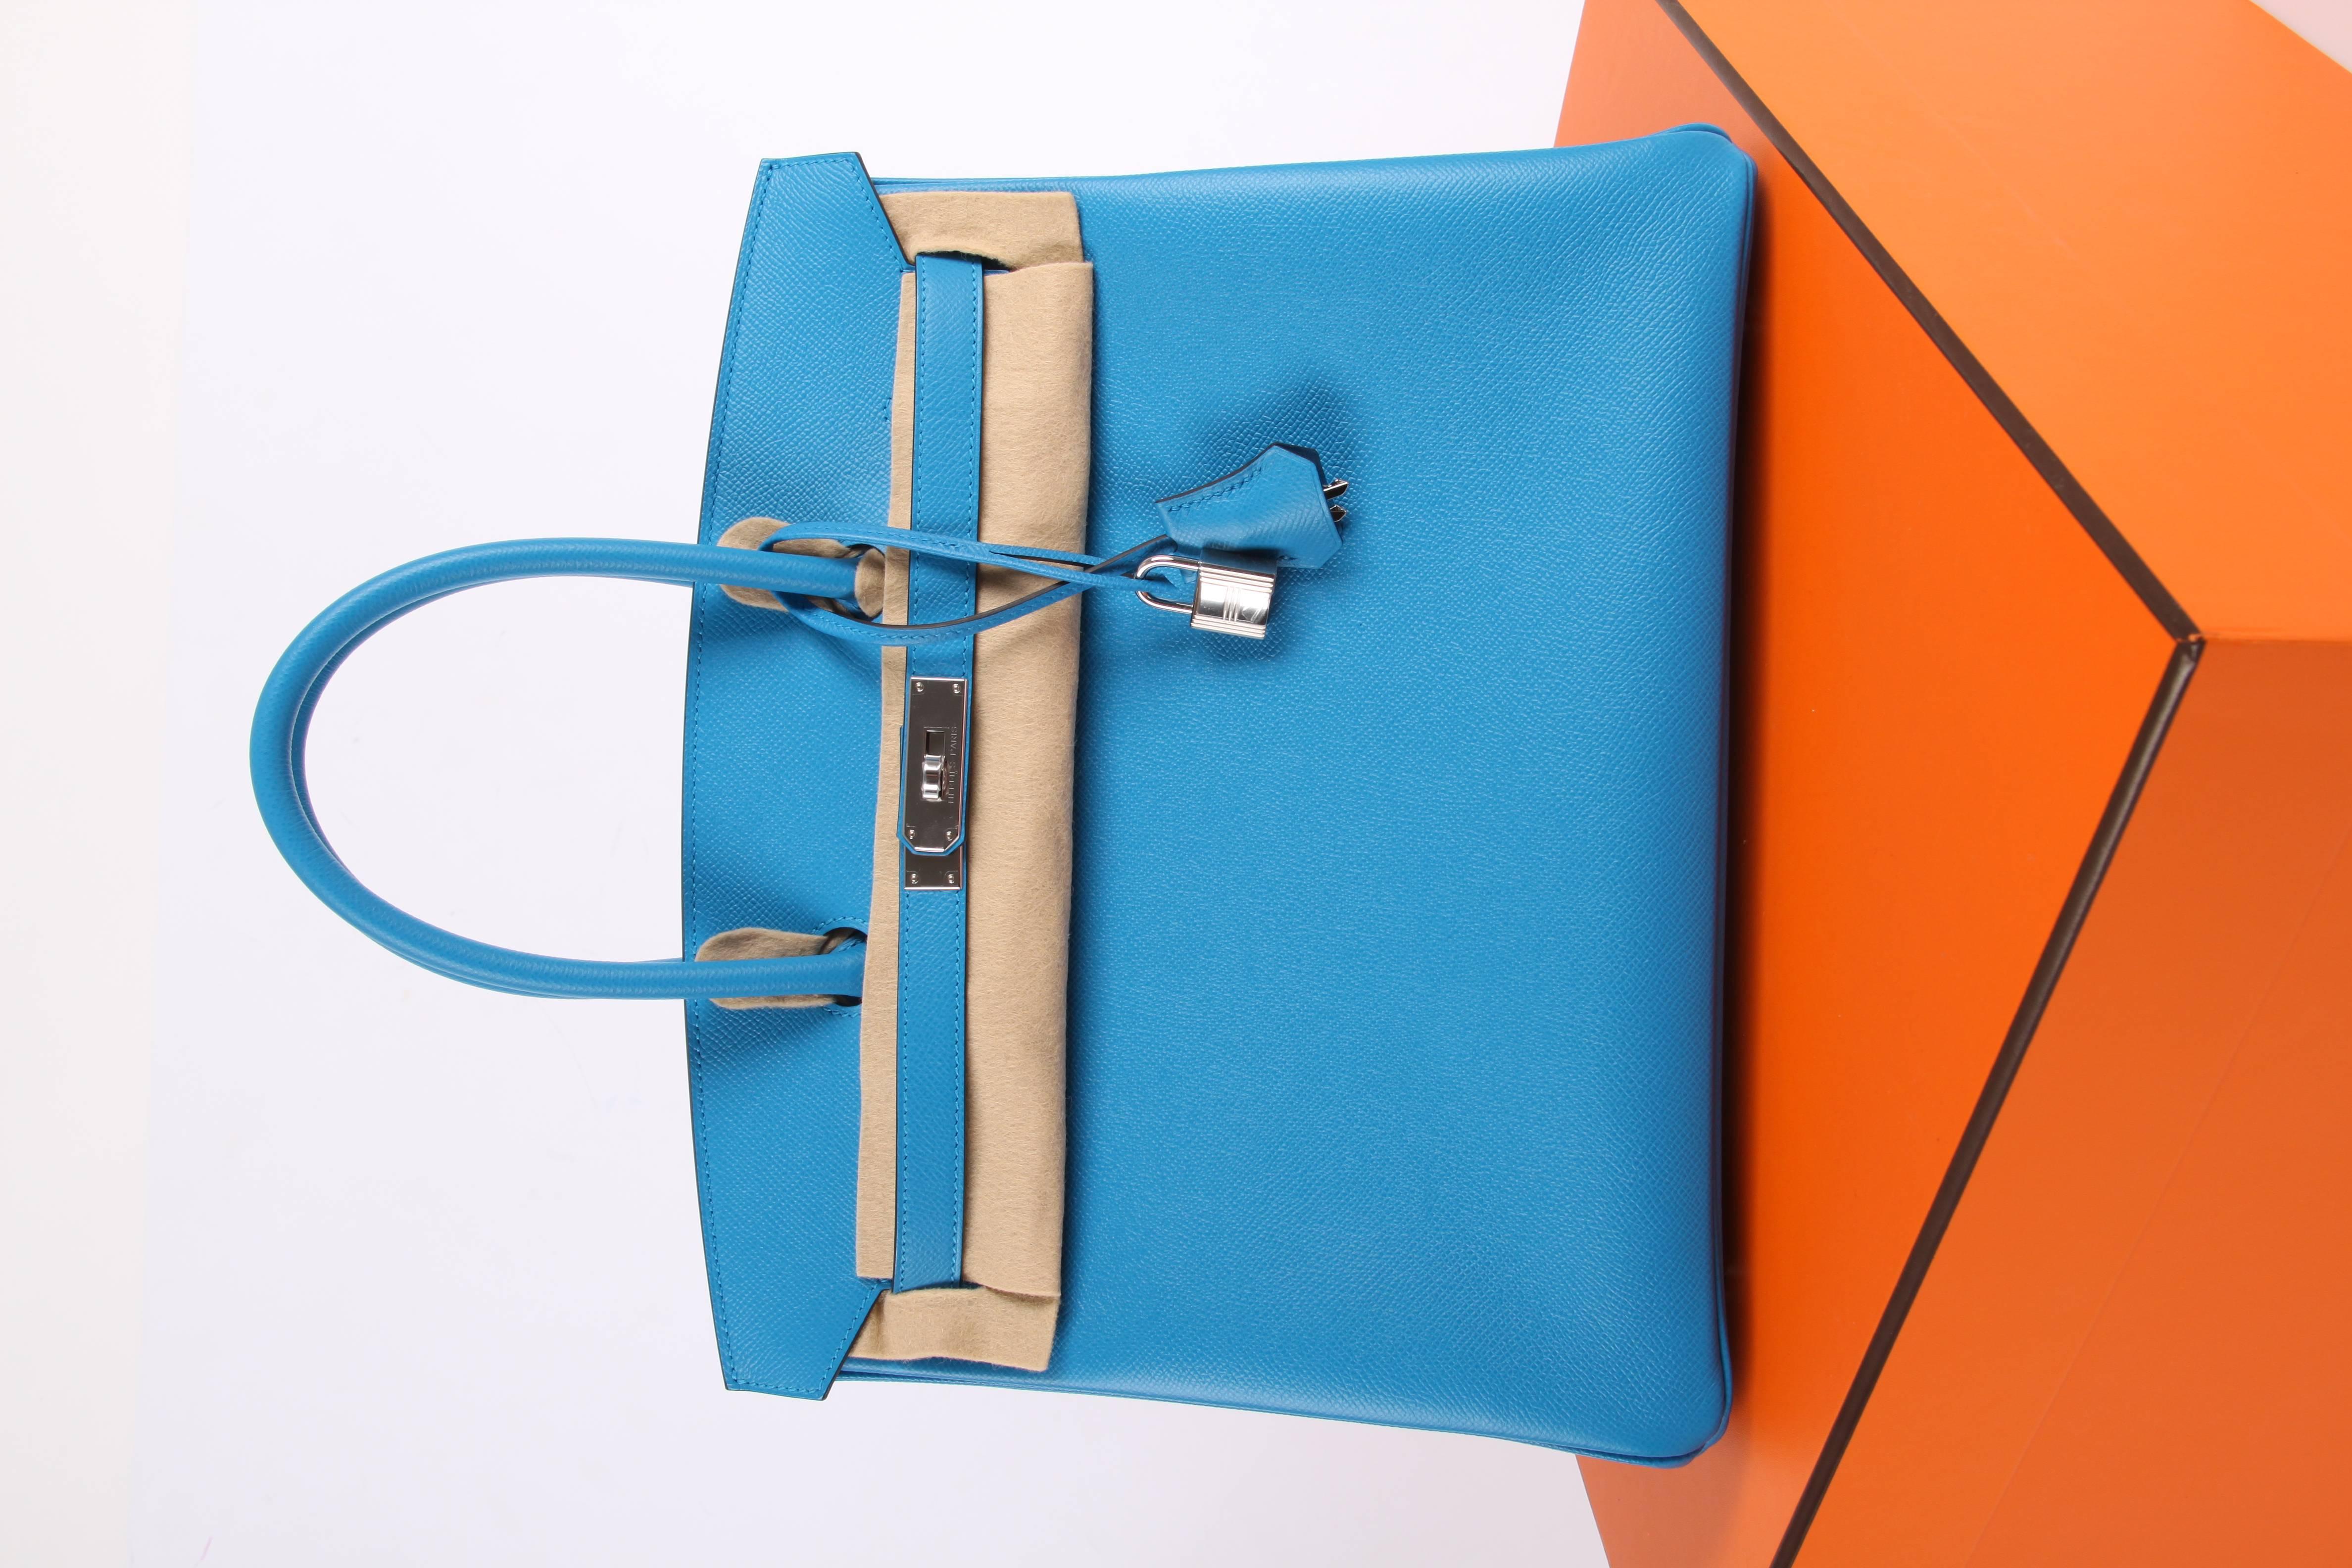 This one stands out!! Hermès Birkin Bag 35 crafted of Epsom leather with palladium hardware, this color is named Bleu Zanzibar. The nicest shade of bright blue you can imagine. New new new!

Front toggle closure, clochette with silver-tone lock and